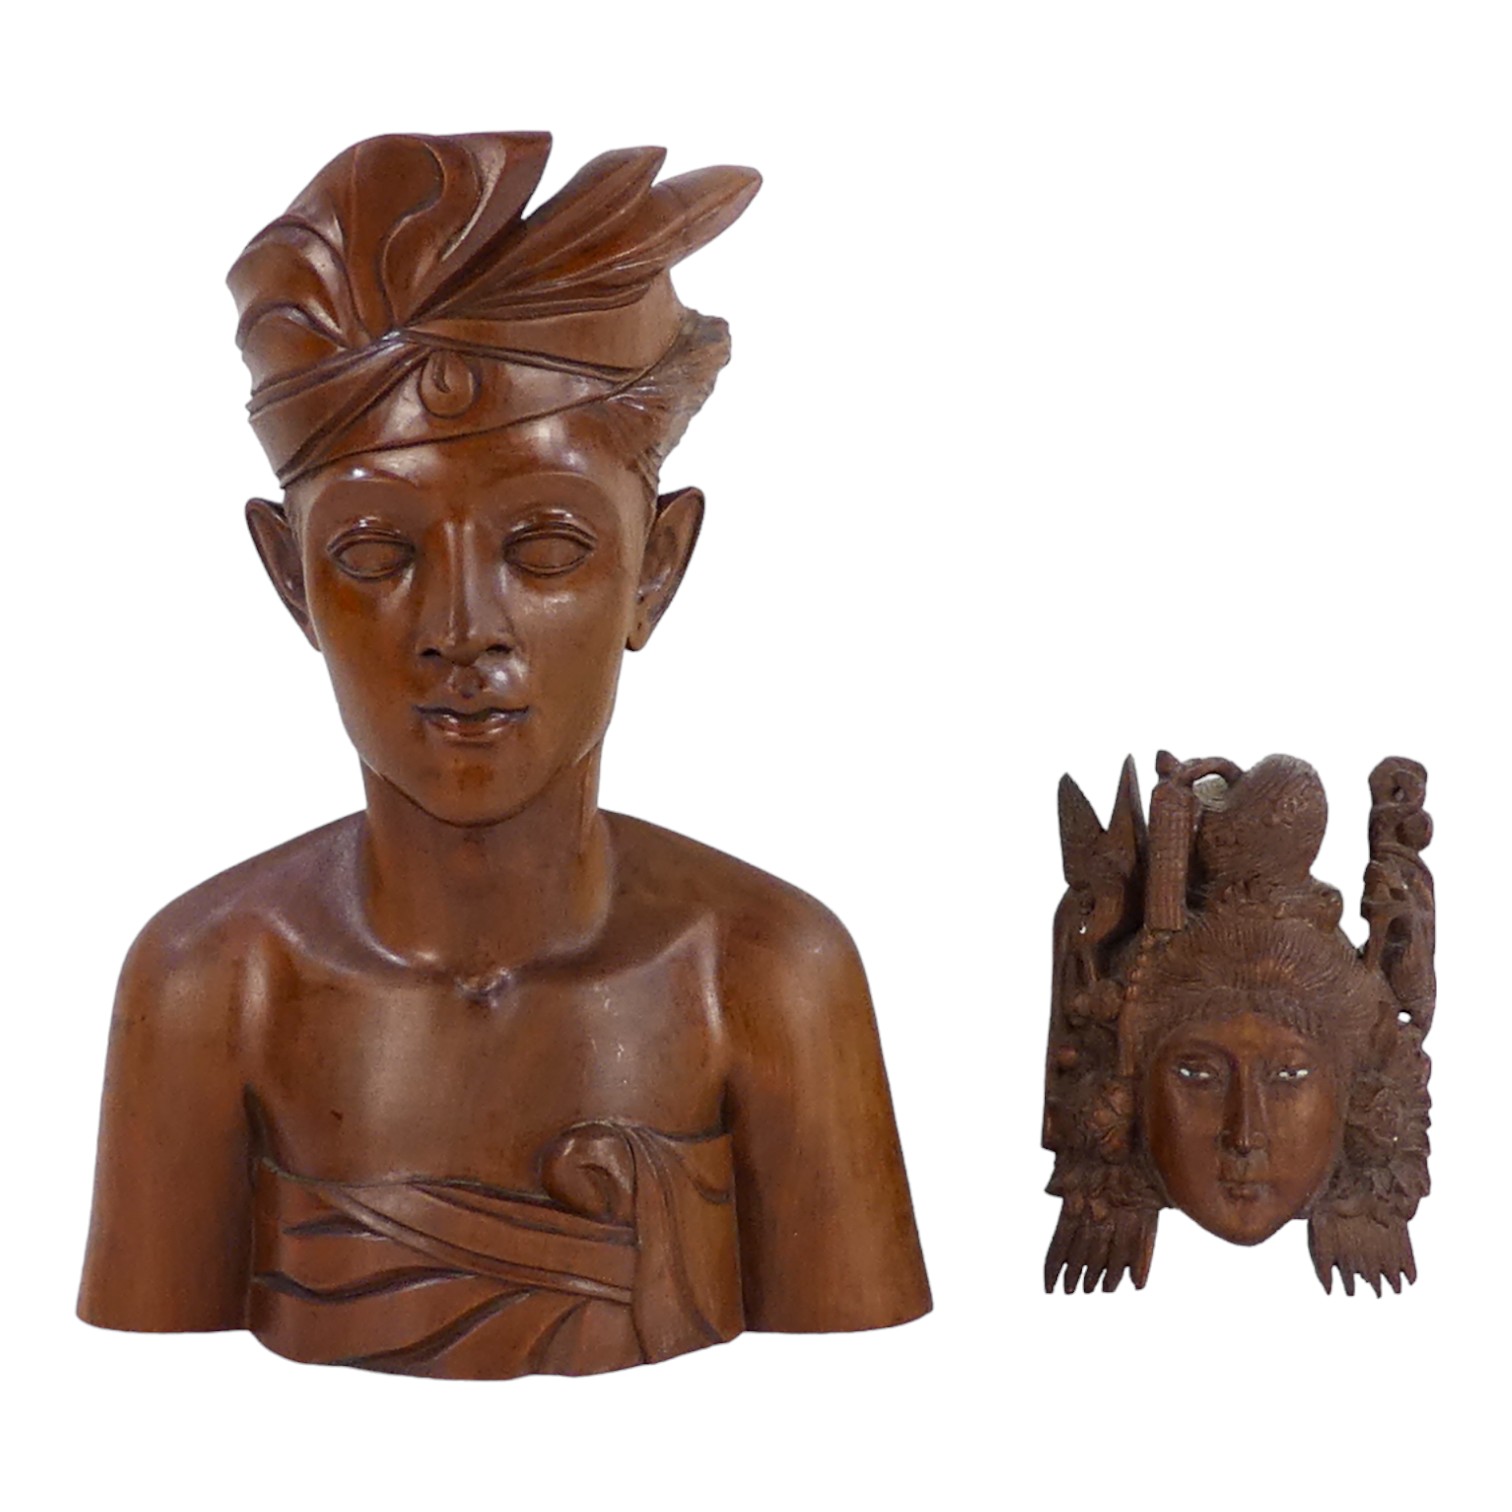 A Balinese 20th century carved hardwood figure - signed to base, height 34cm, together with a